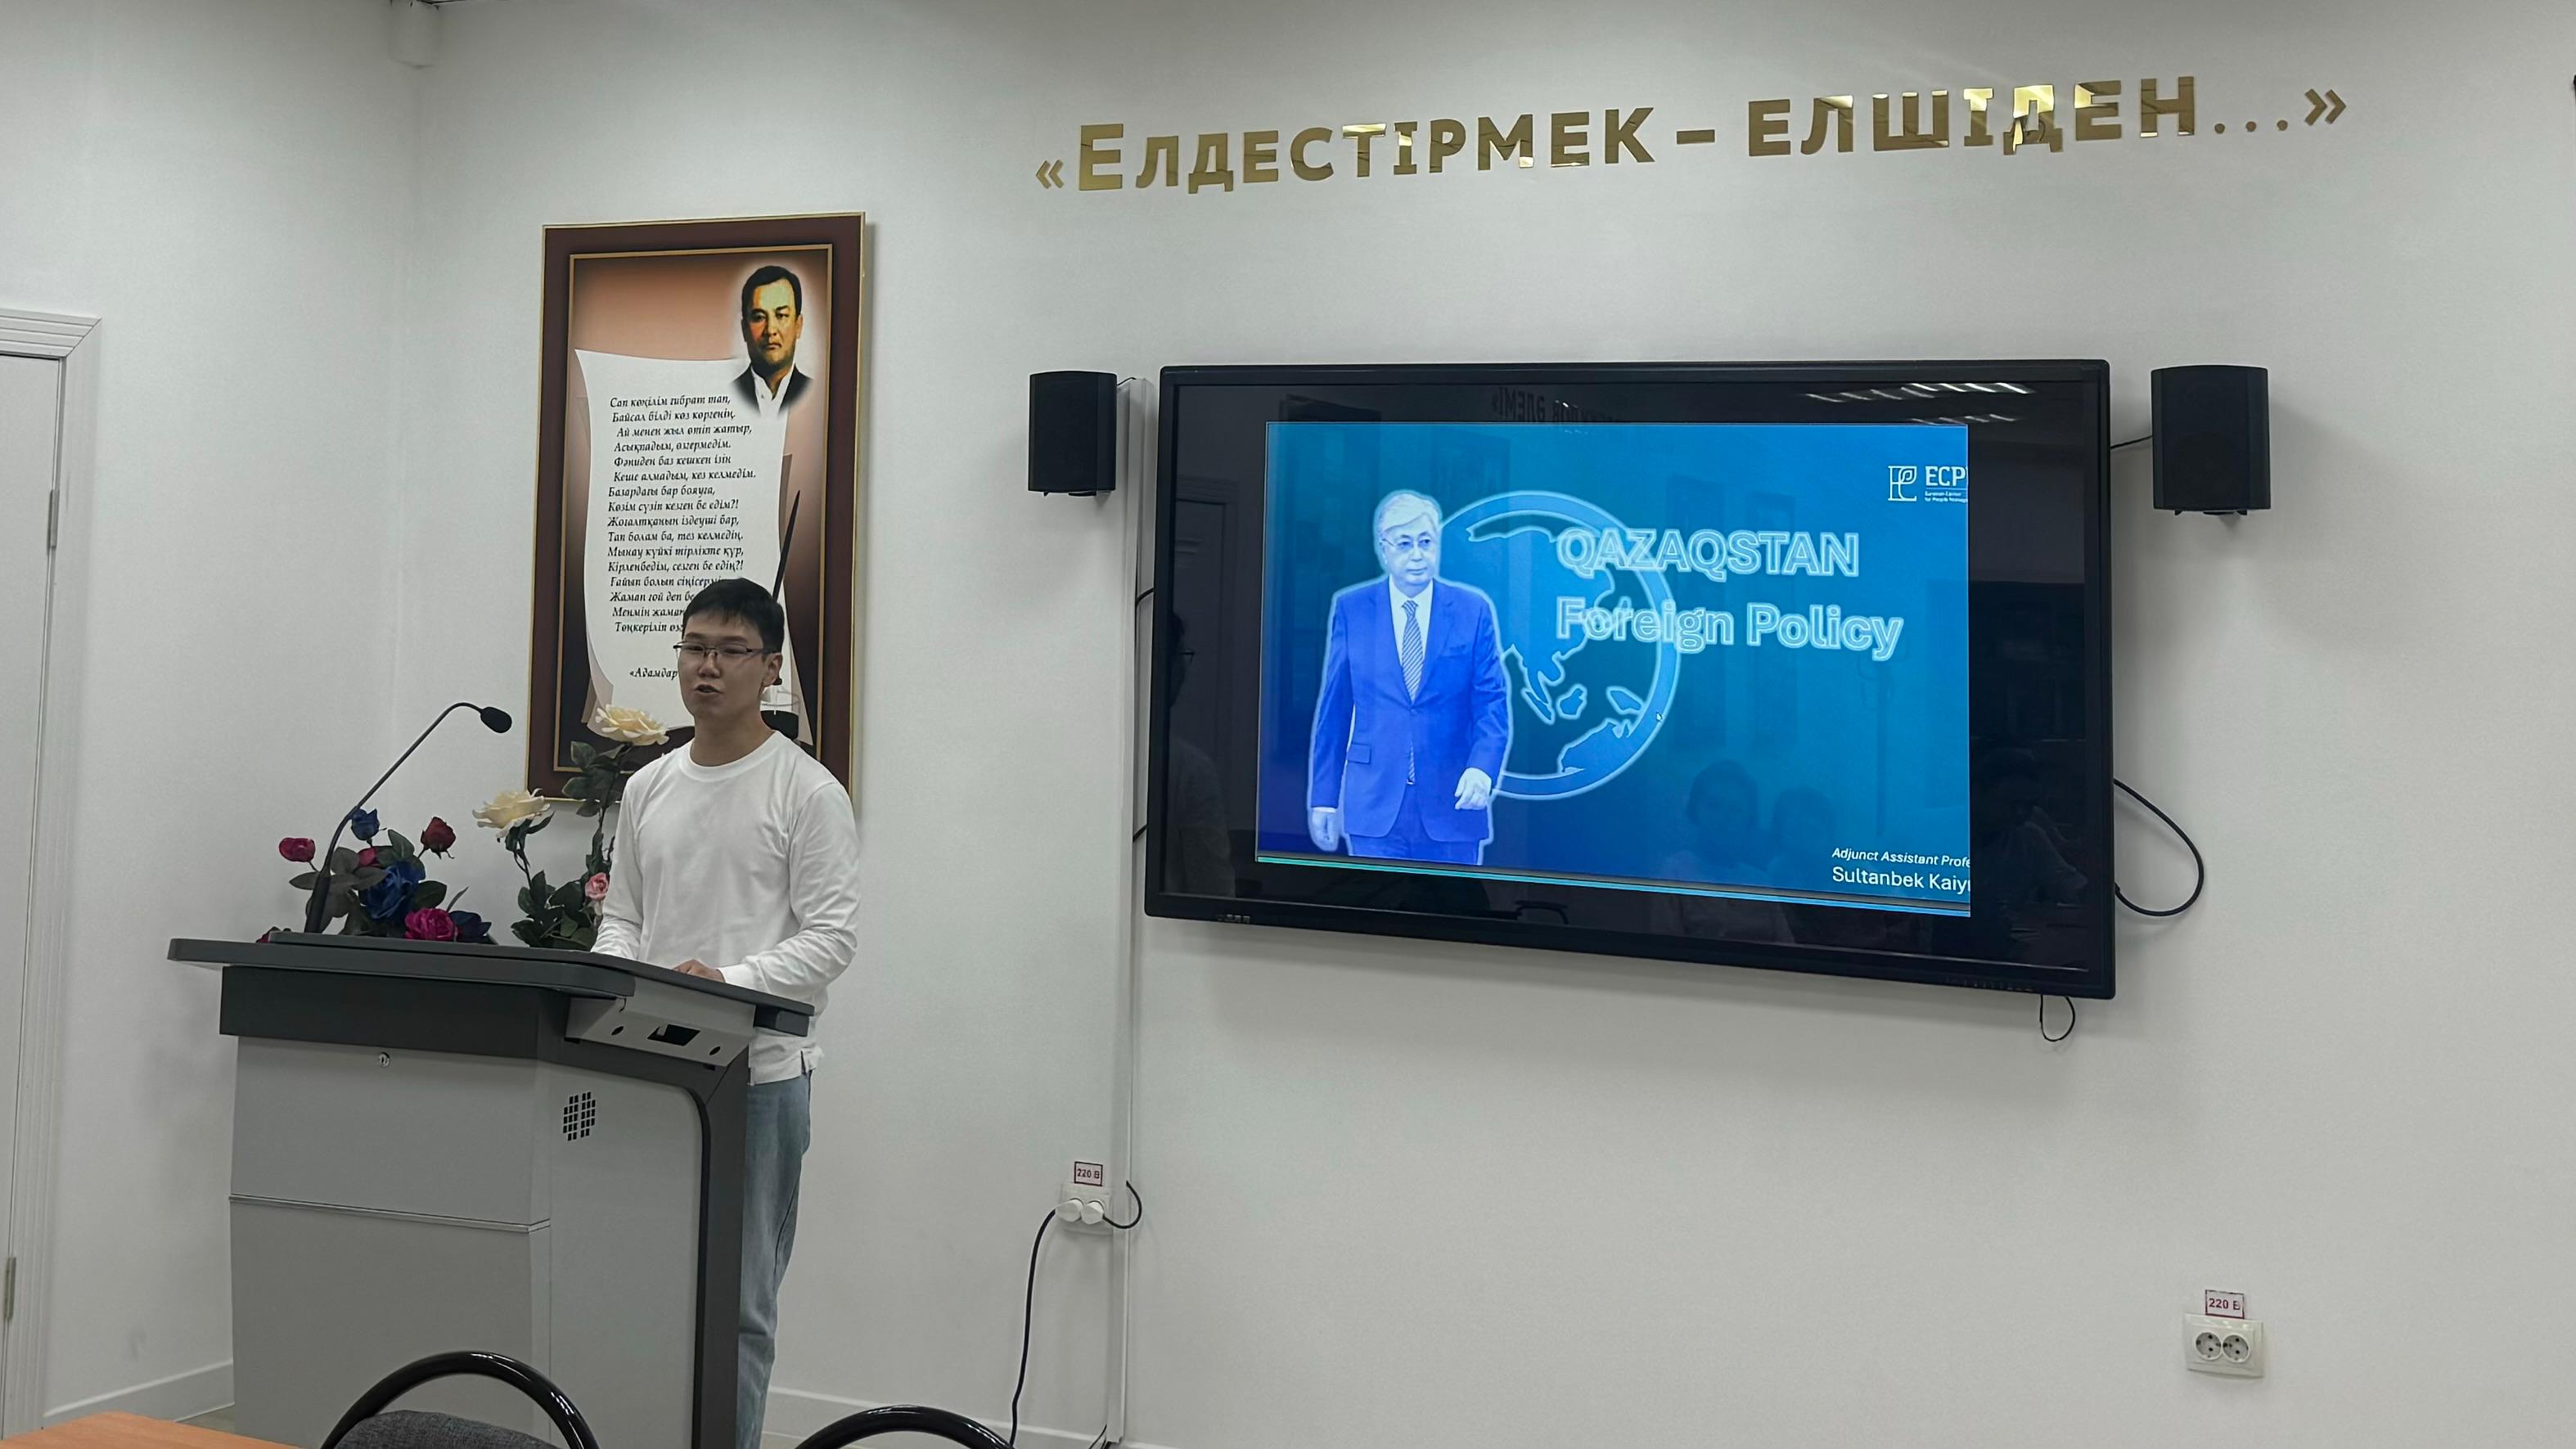 Meeting of doctoral students with the Head of projects of the analytical company "Eurasian centre for for People Management" Sultanbek Kaiym on the topic: "Foreign policy of the Republic of Kazakhstan at the present stage".